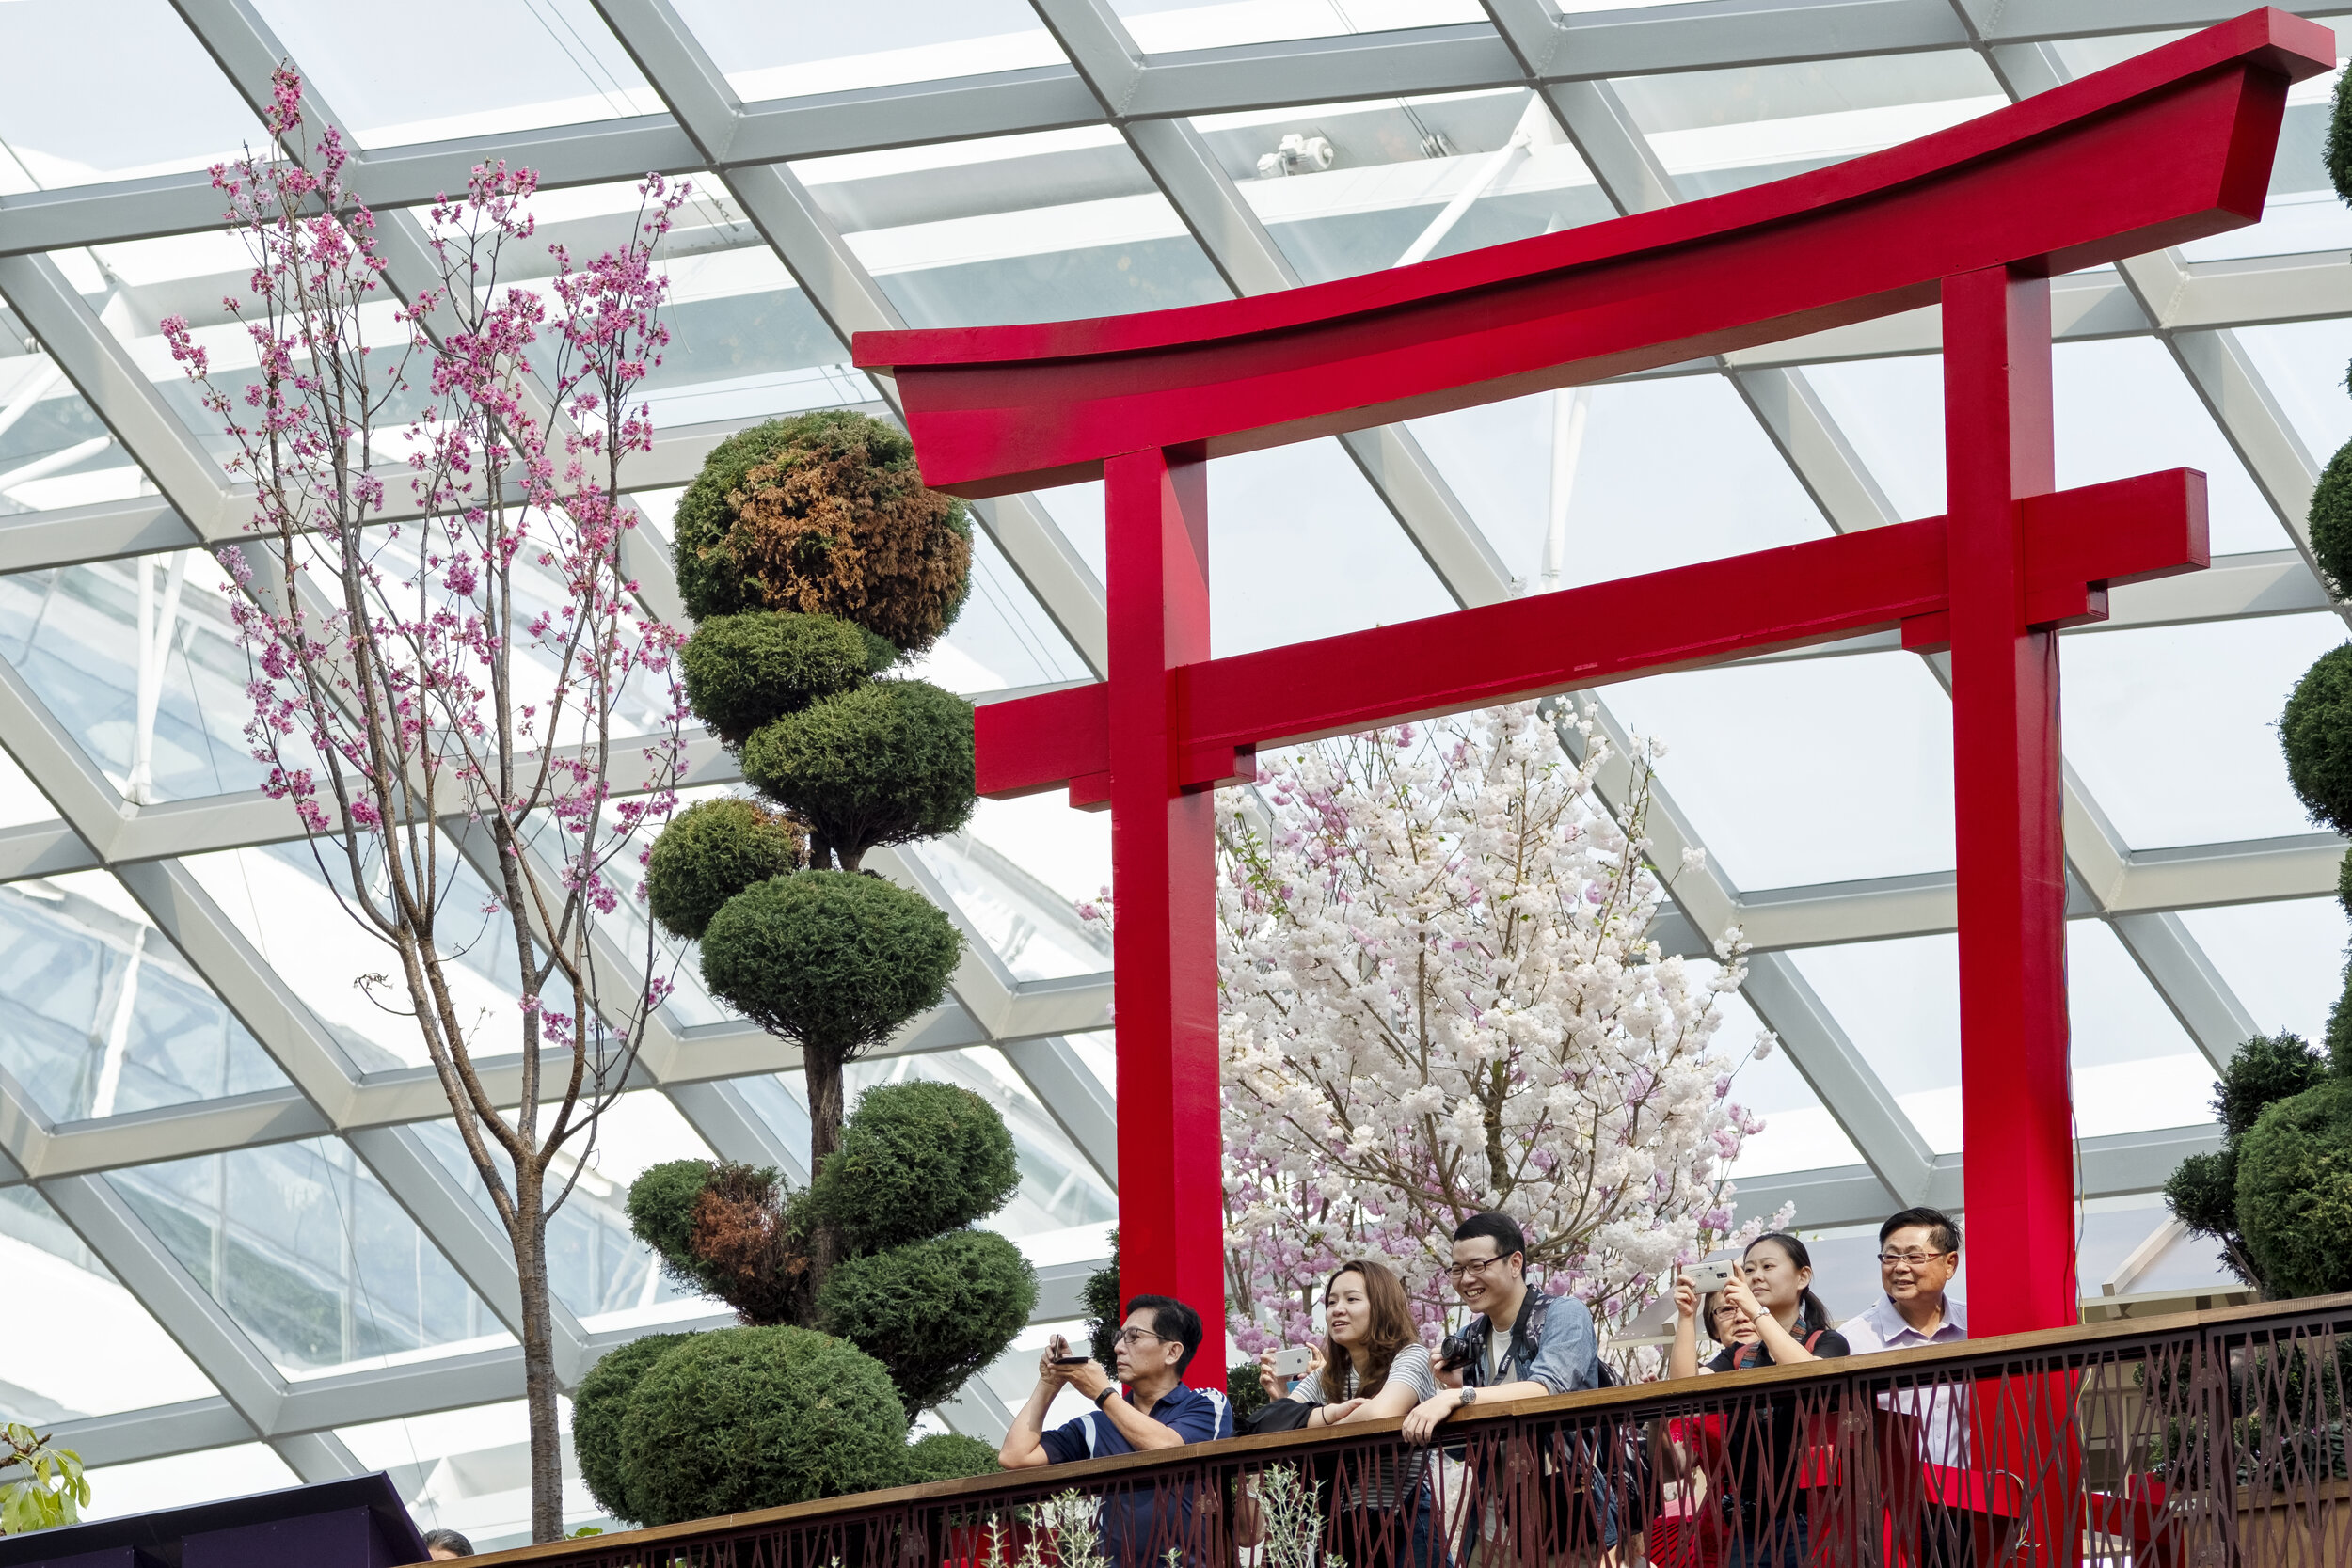  People take pictures and enjoy the view under a faux torii gate during the Sakura Matsuri floral display at Gardens by the Bay in Singapore 